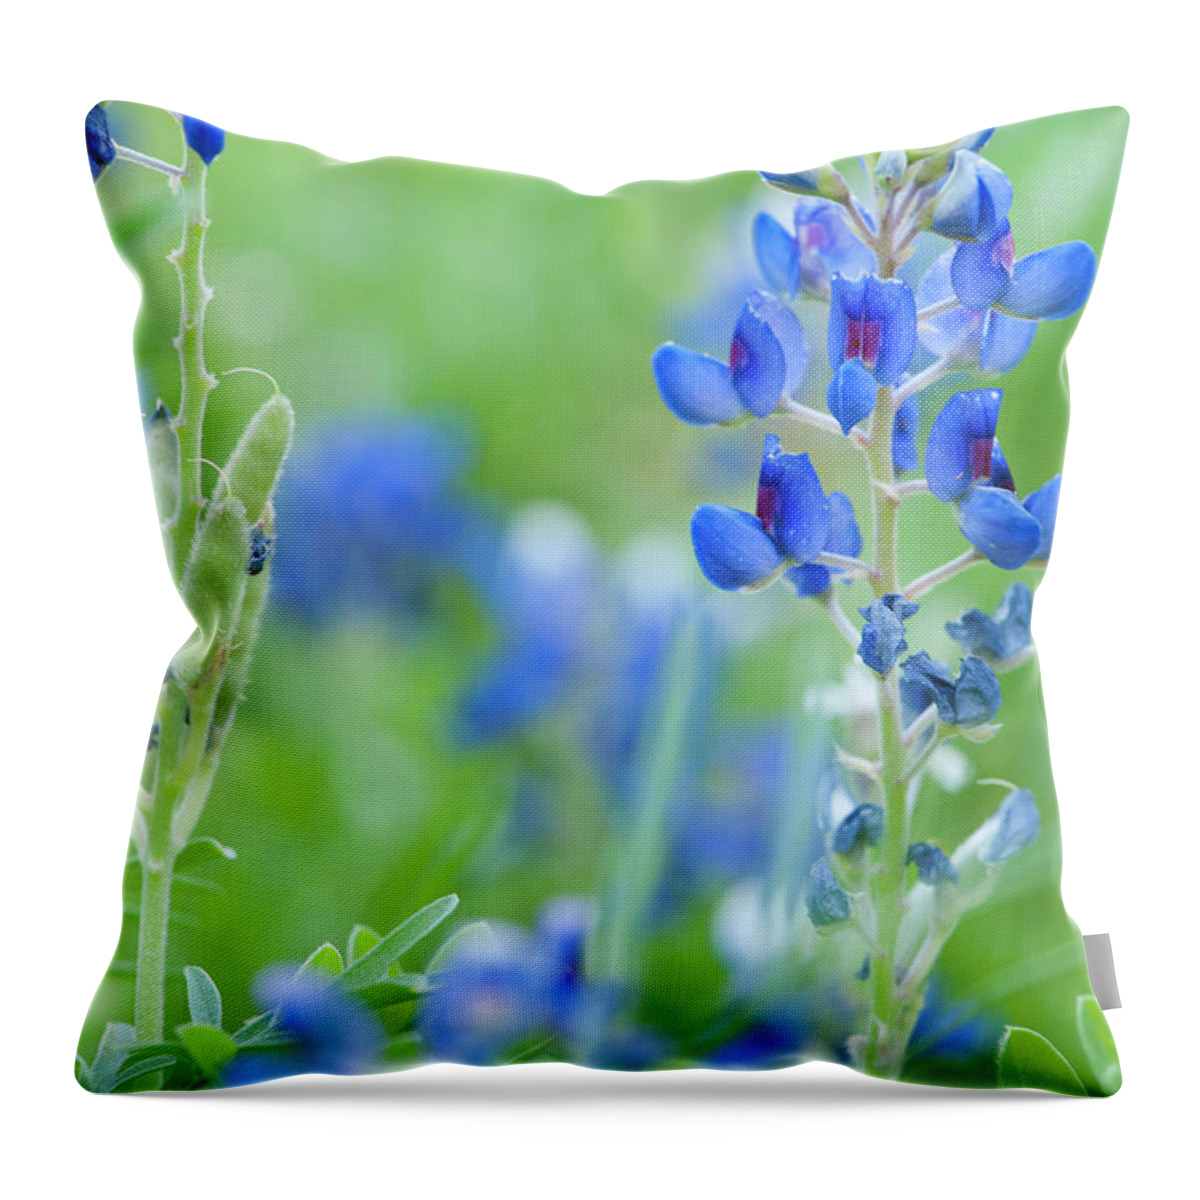 Flower Throw Pillow featuring the photograph Bluebonnets by Stephen Anderson